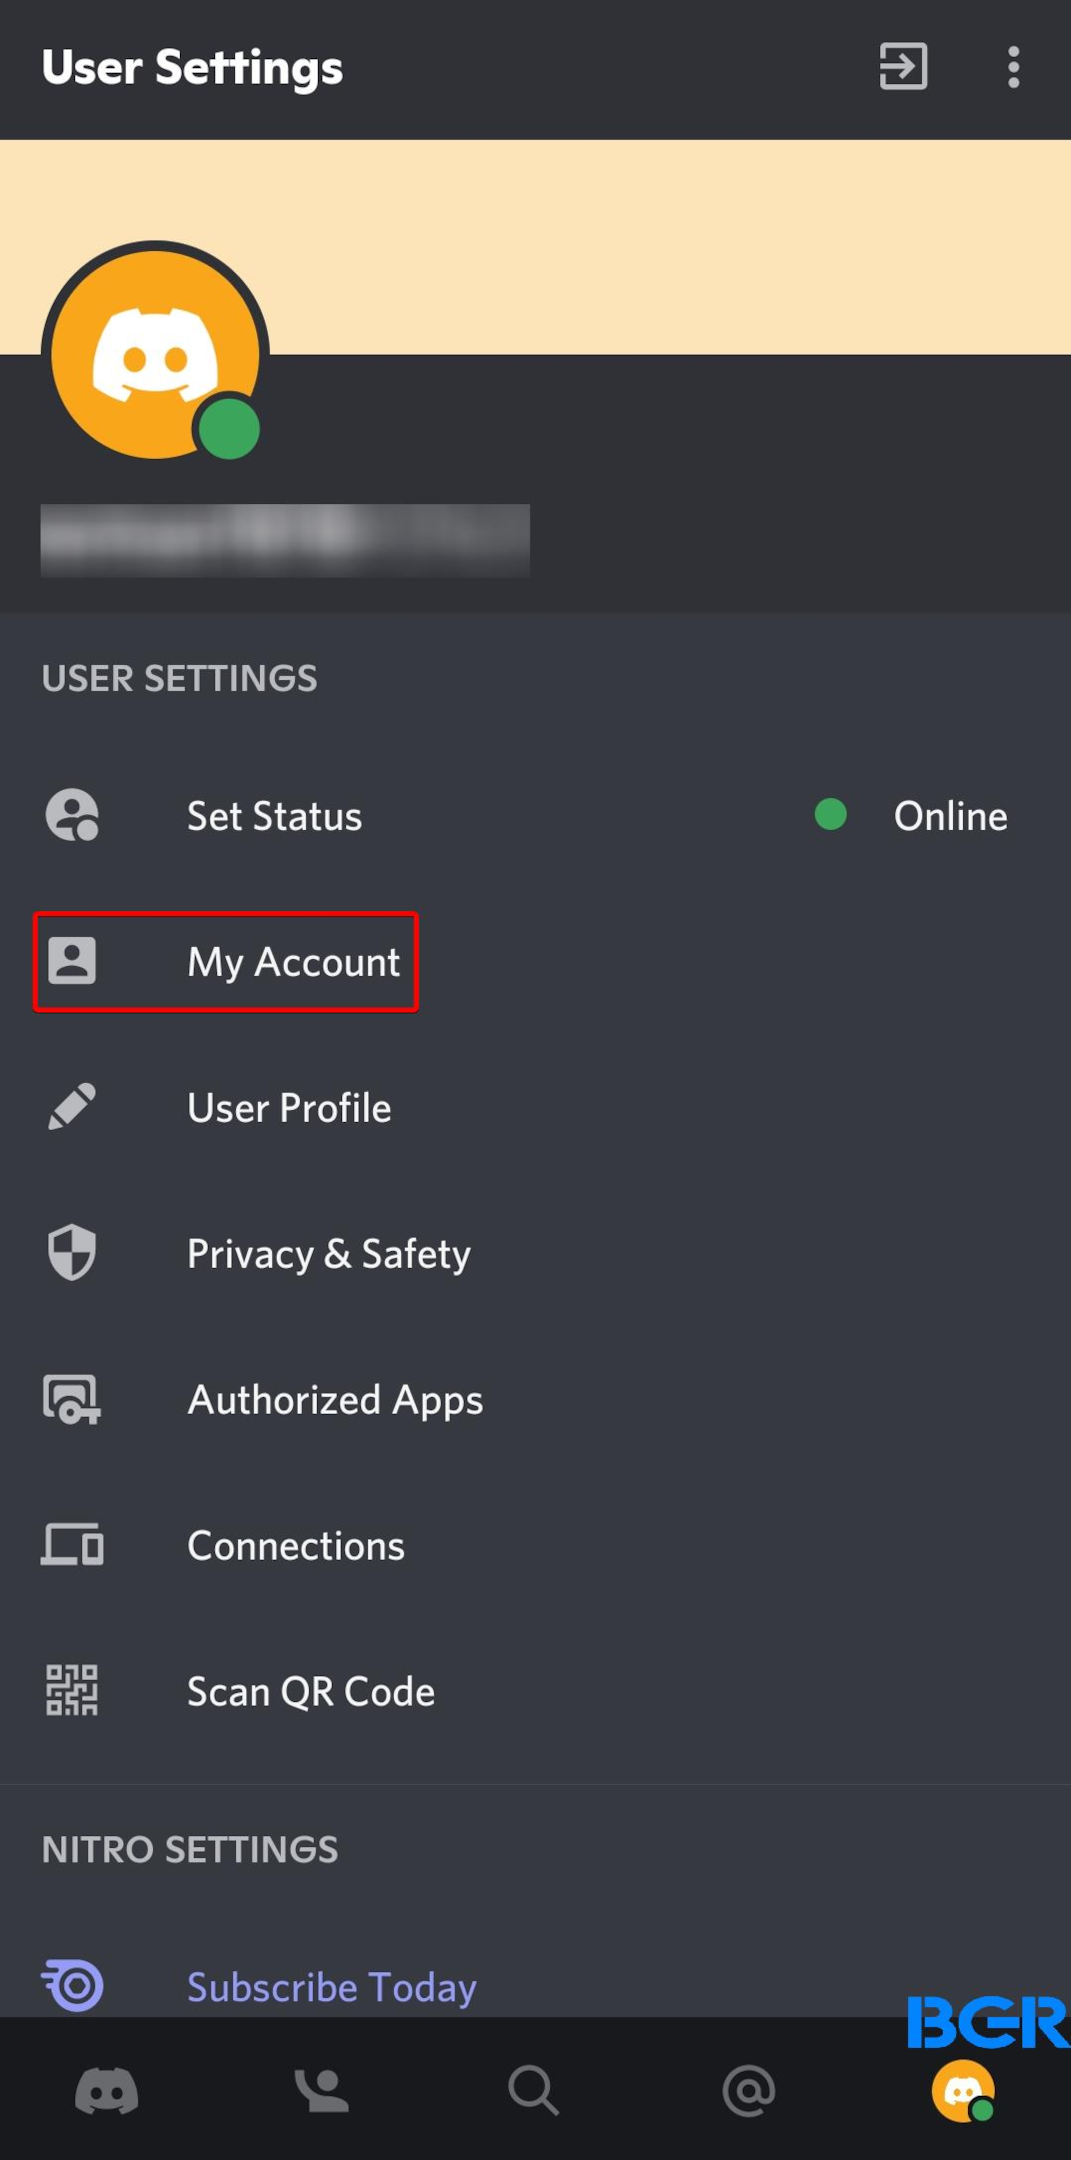 Tap on My Account under User Settings